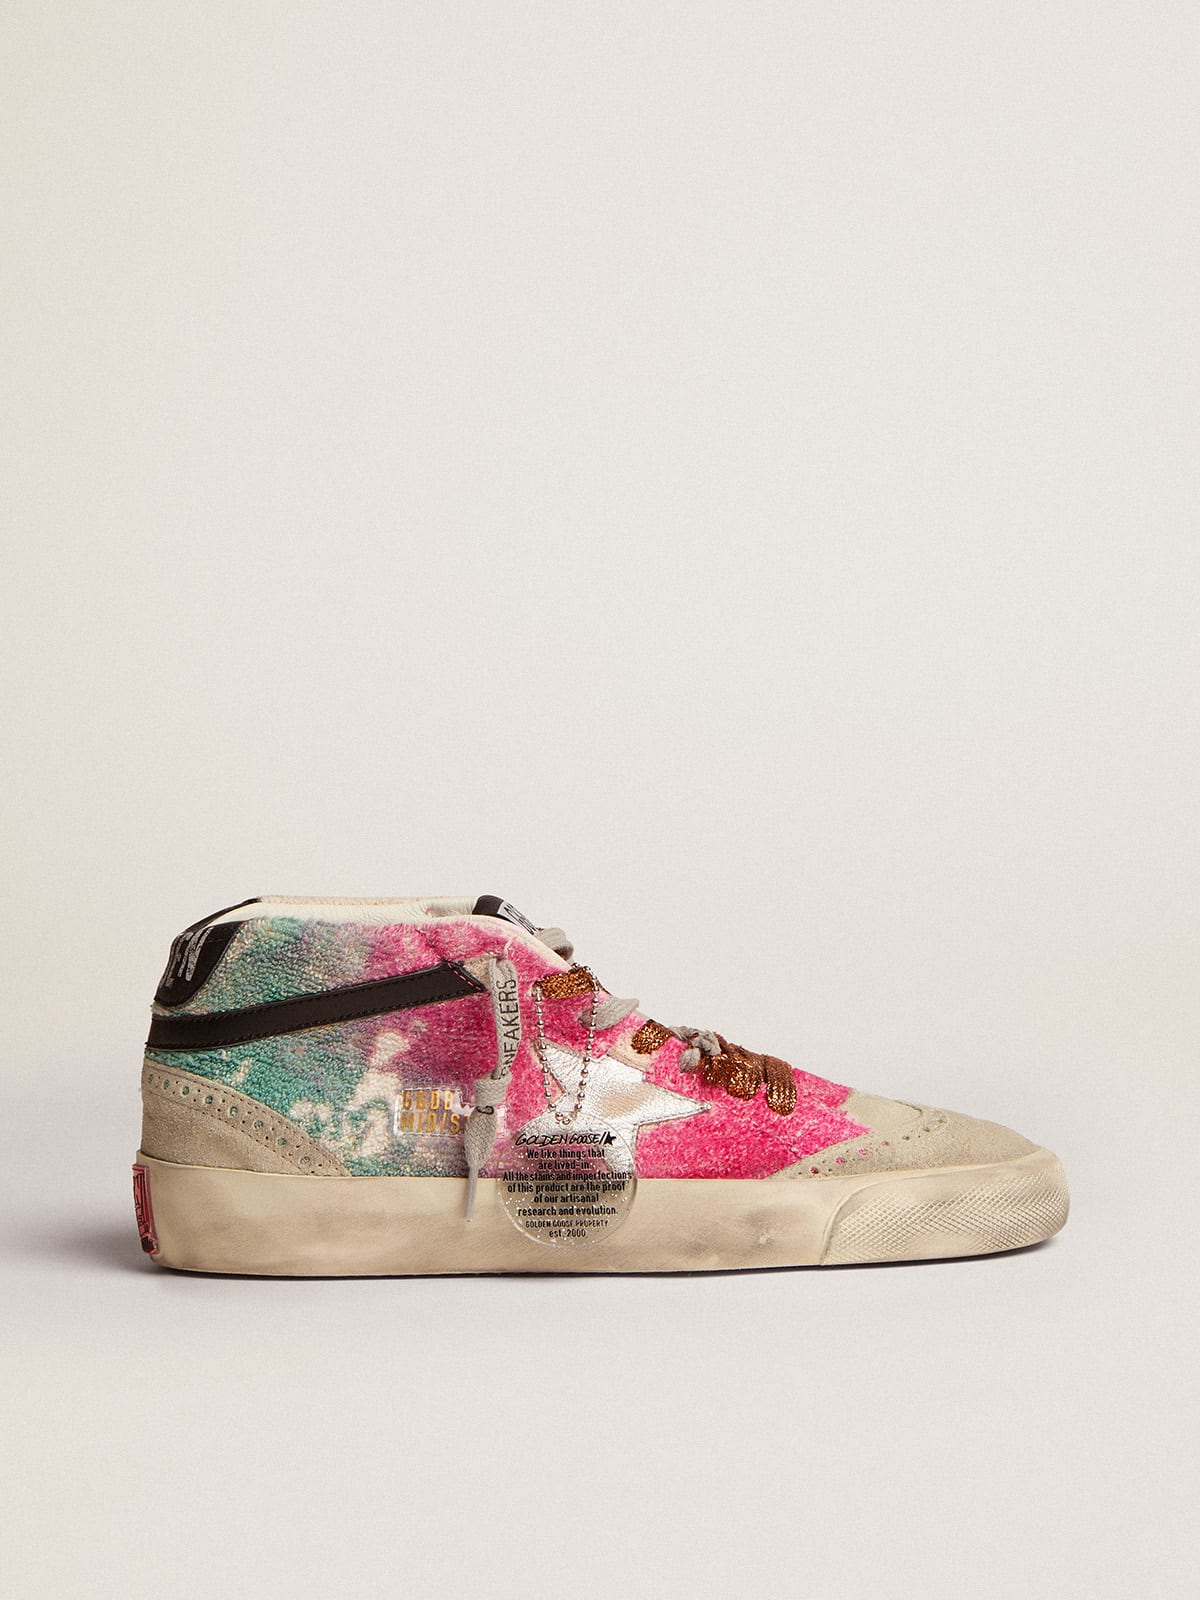 Golden Goose - Women’s Mid Star LAB in terry with silver laminated leather star in 